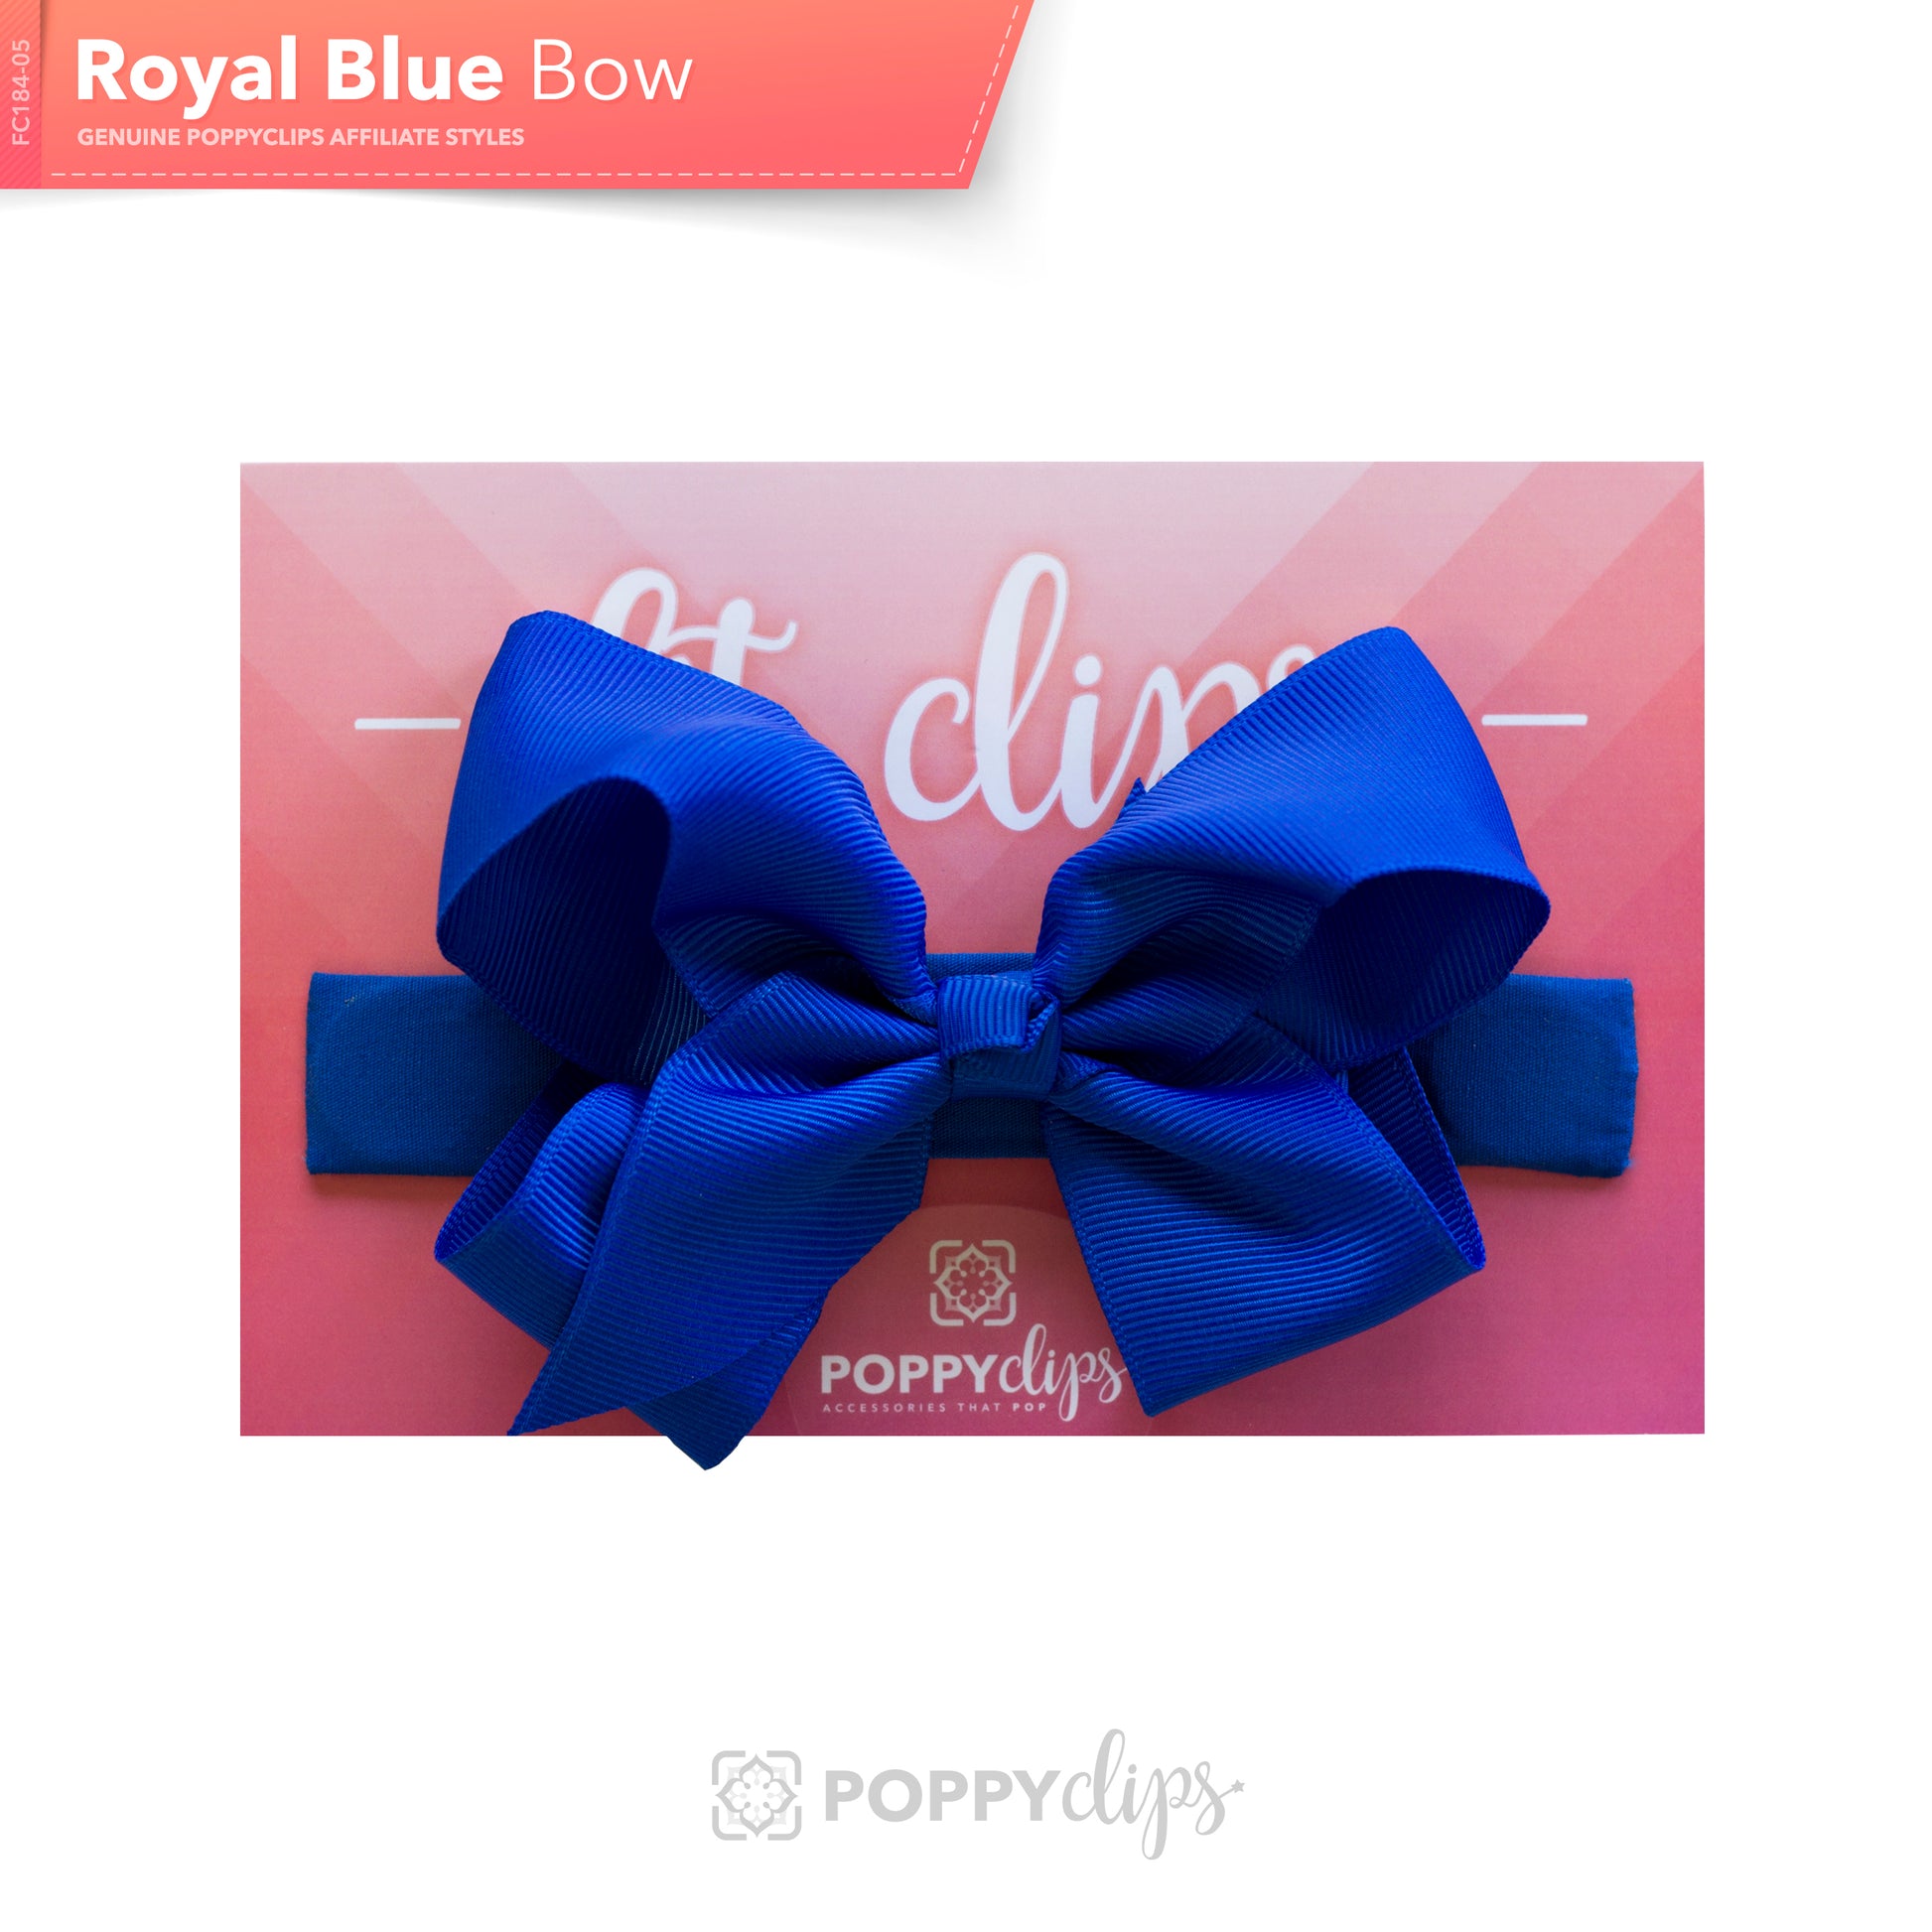 5 ¼” long by 7/8” wide royal blue material with hidden magnets at each end.  Centered on the outside is a double royal blue bow that is approximately 4” across.